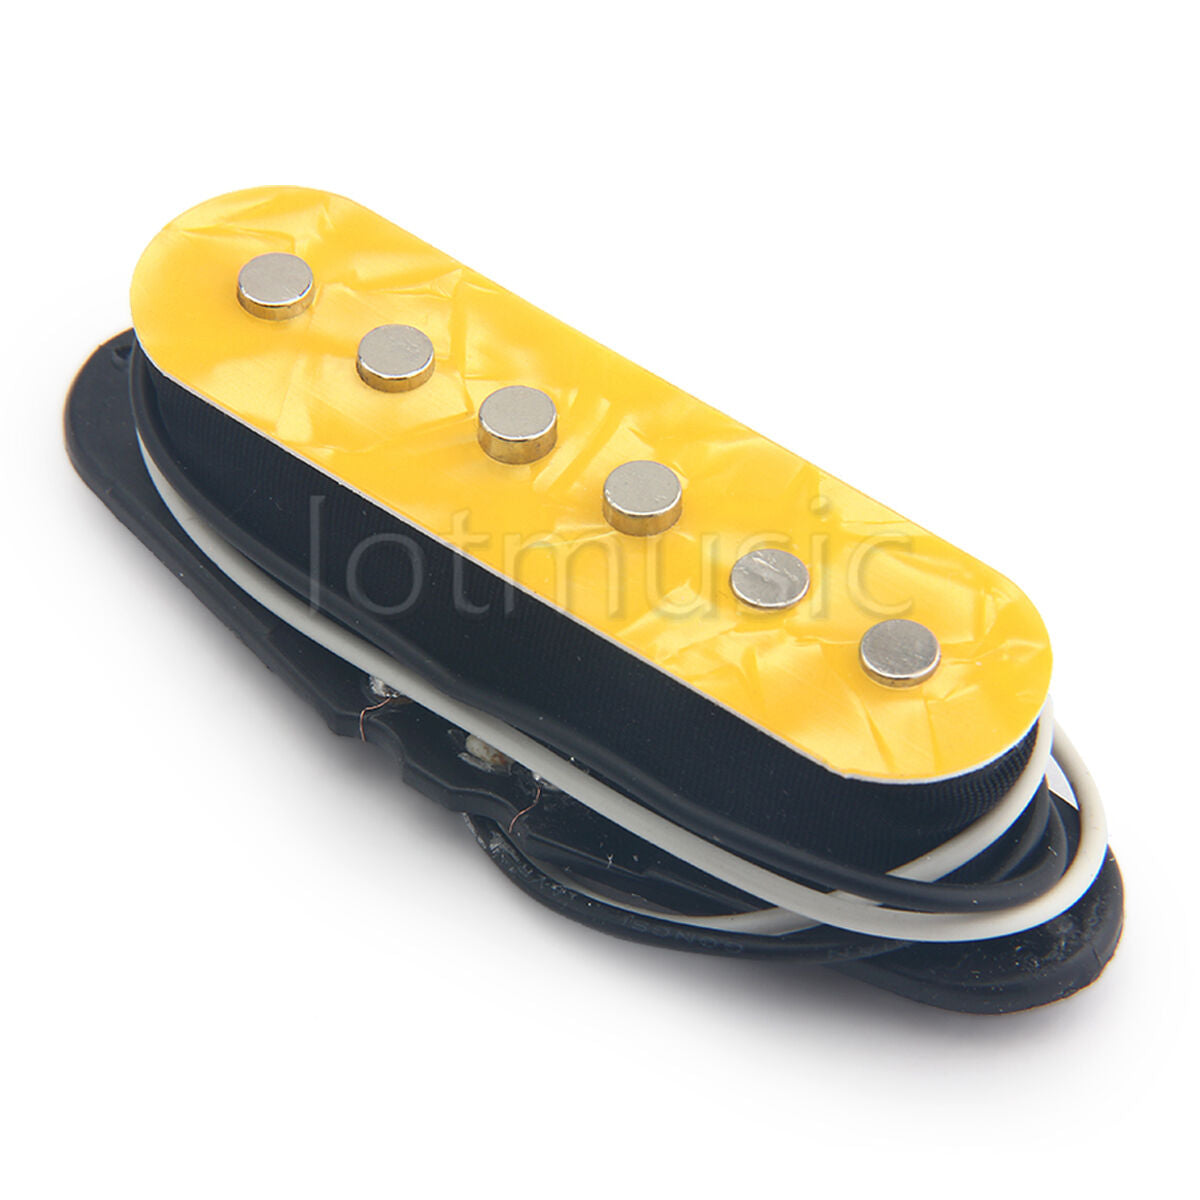 1 Pc Guitar Neck Pickup Single Coil For Electric Parts Yellow Pearlolid